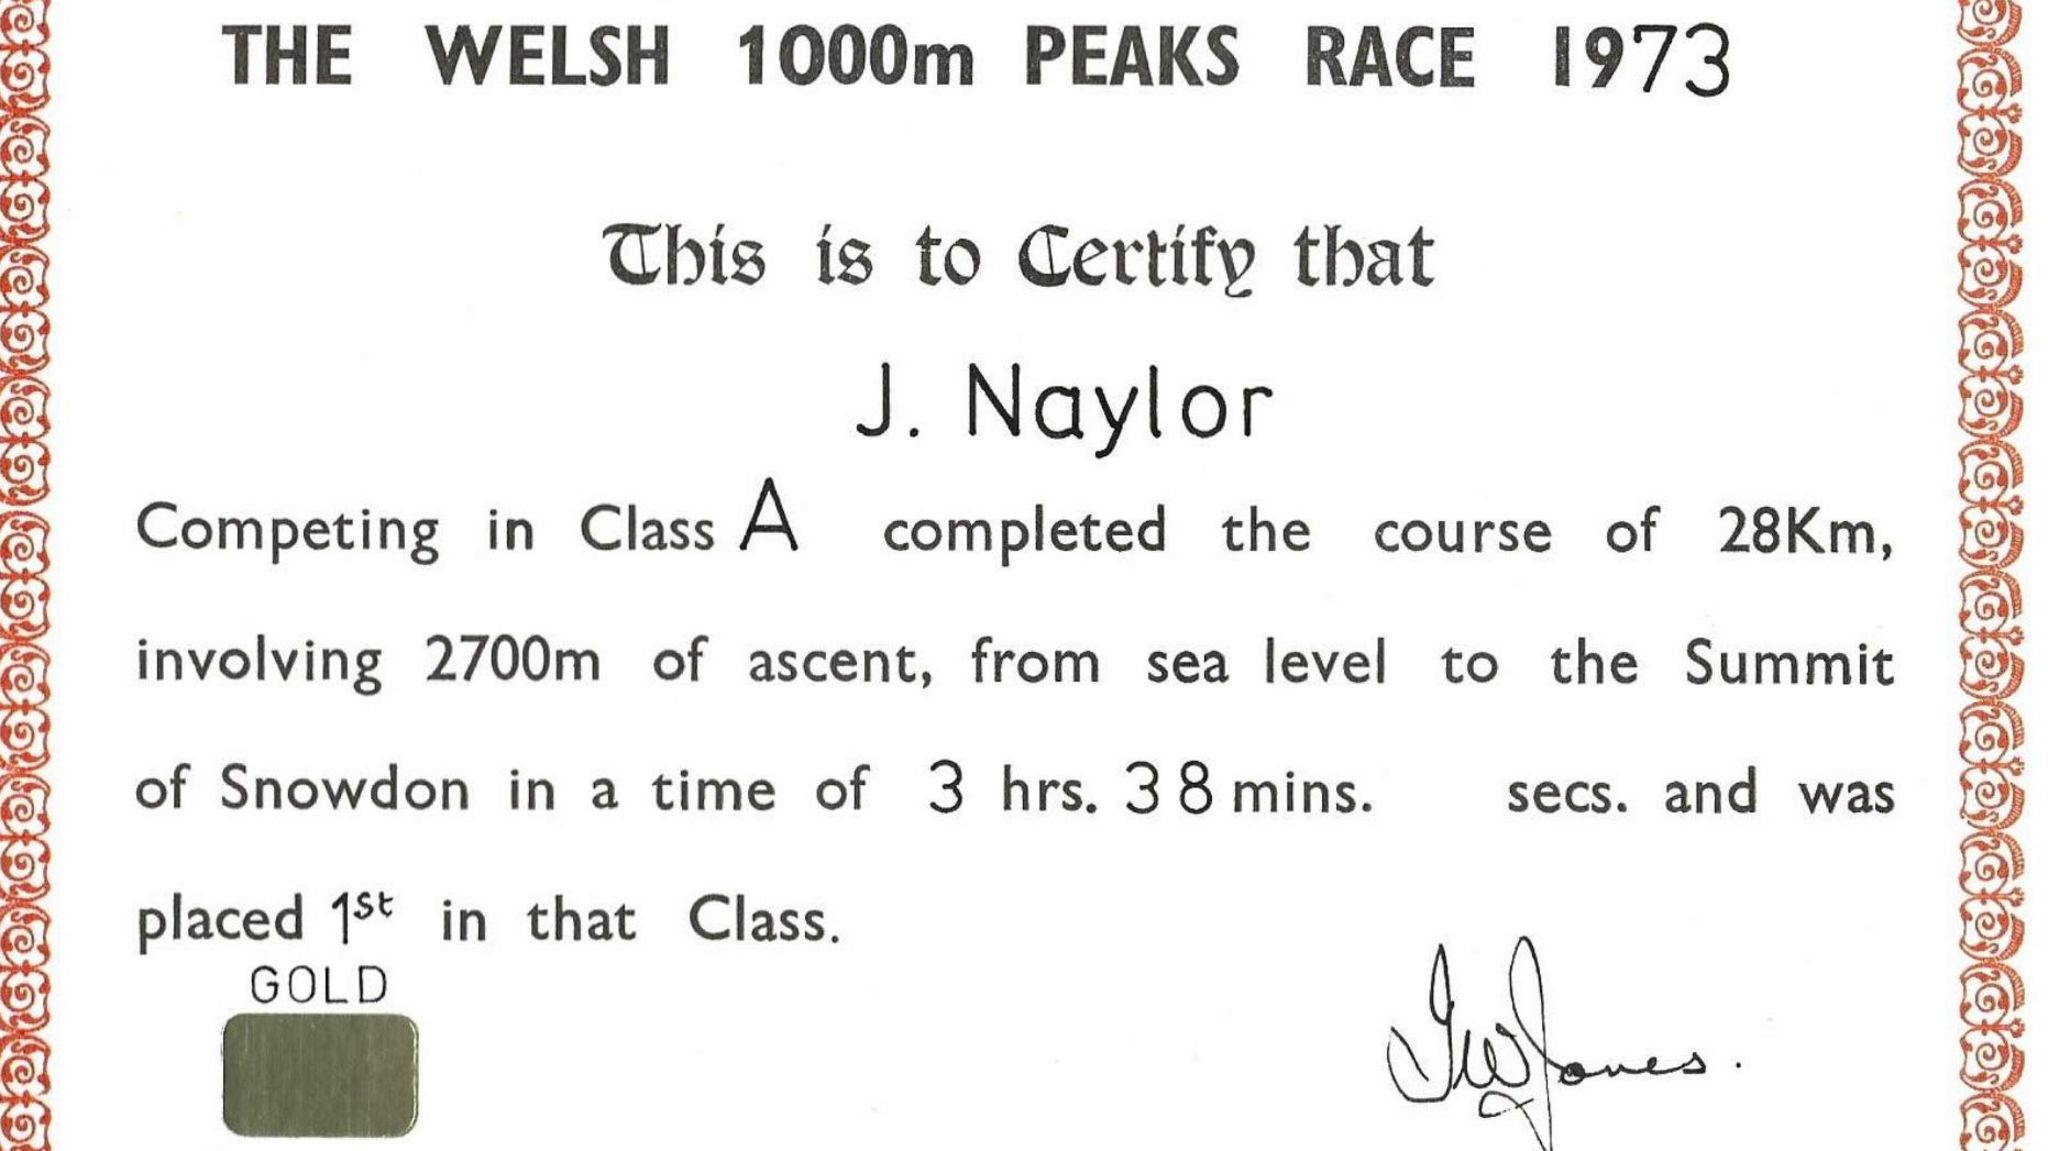 A certificate from 1973 awarded to My Naylor for coming first in the Class A division in the Welsh 1000m Peaks Race. He completed the 28km, 2700 ascent challenge in three hours and 28 minutes